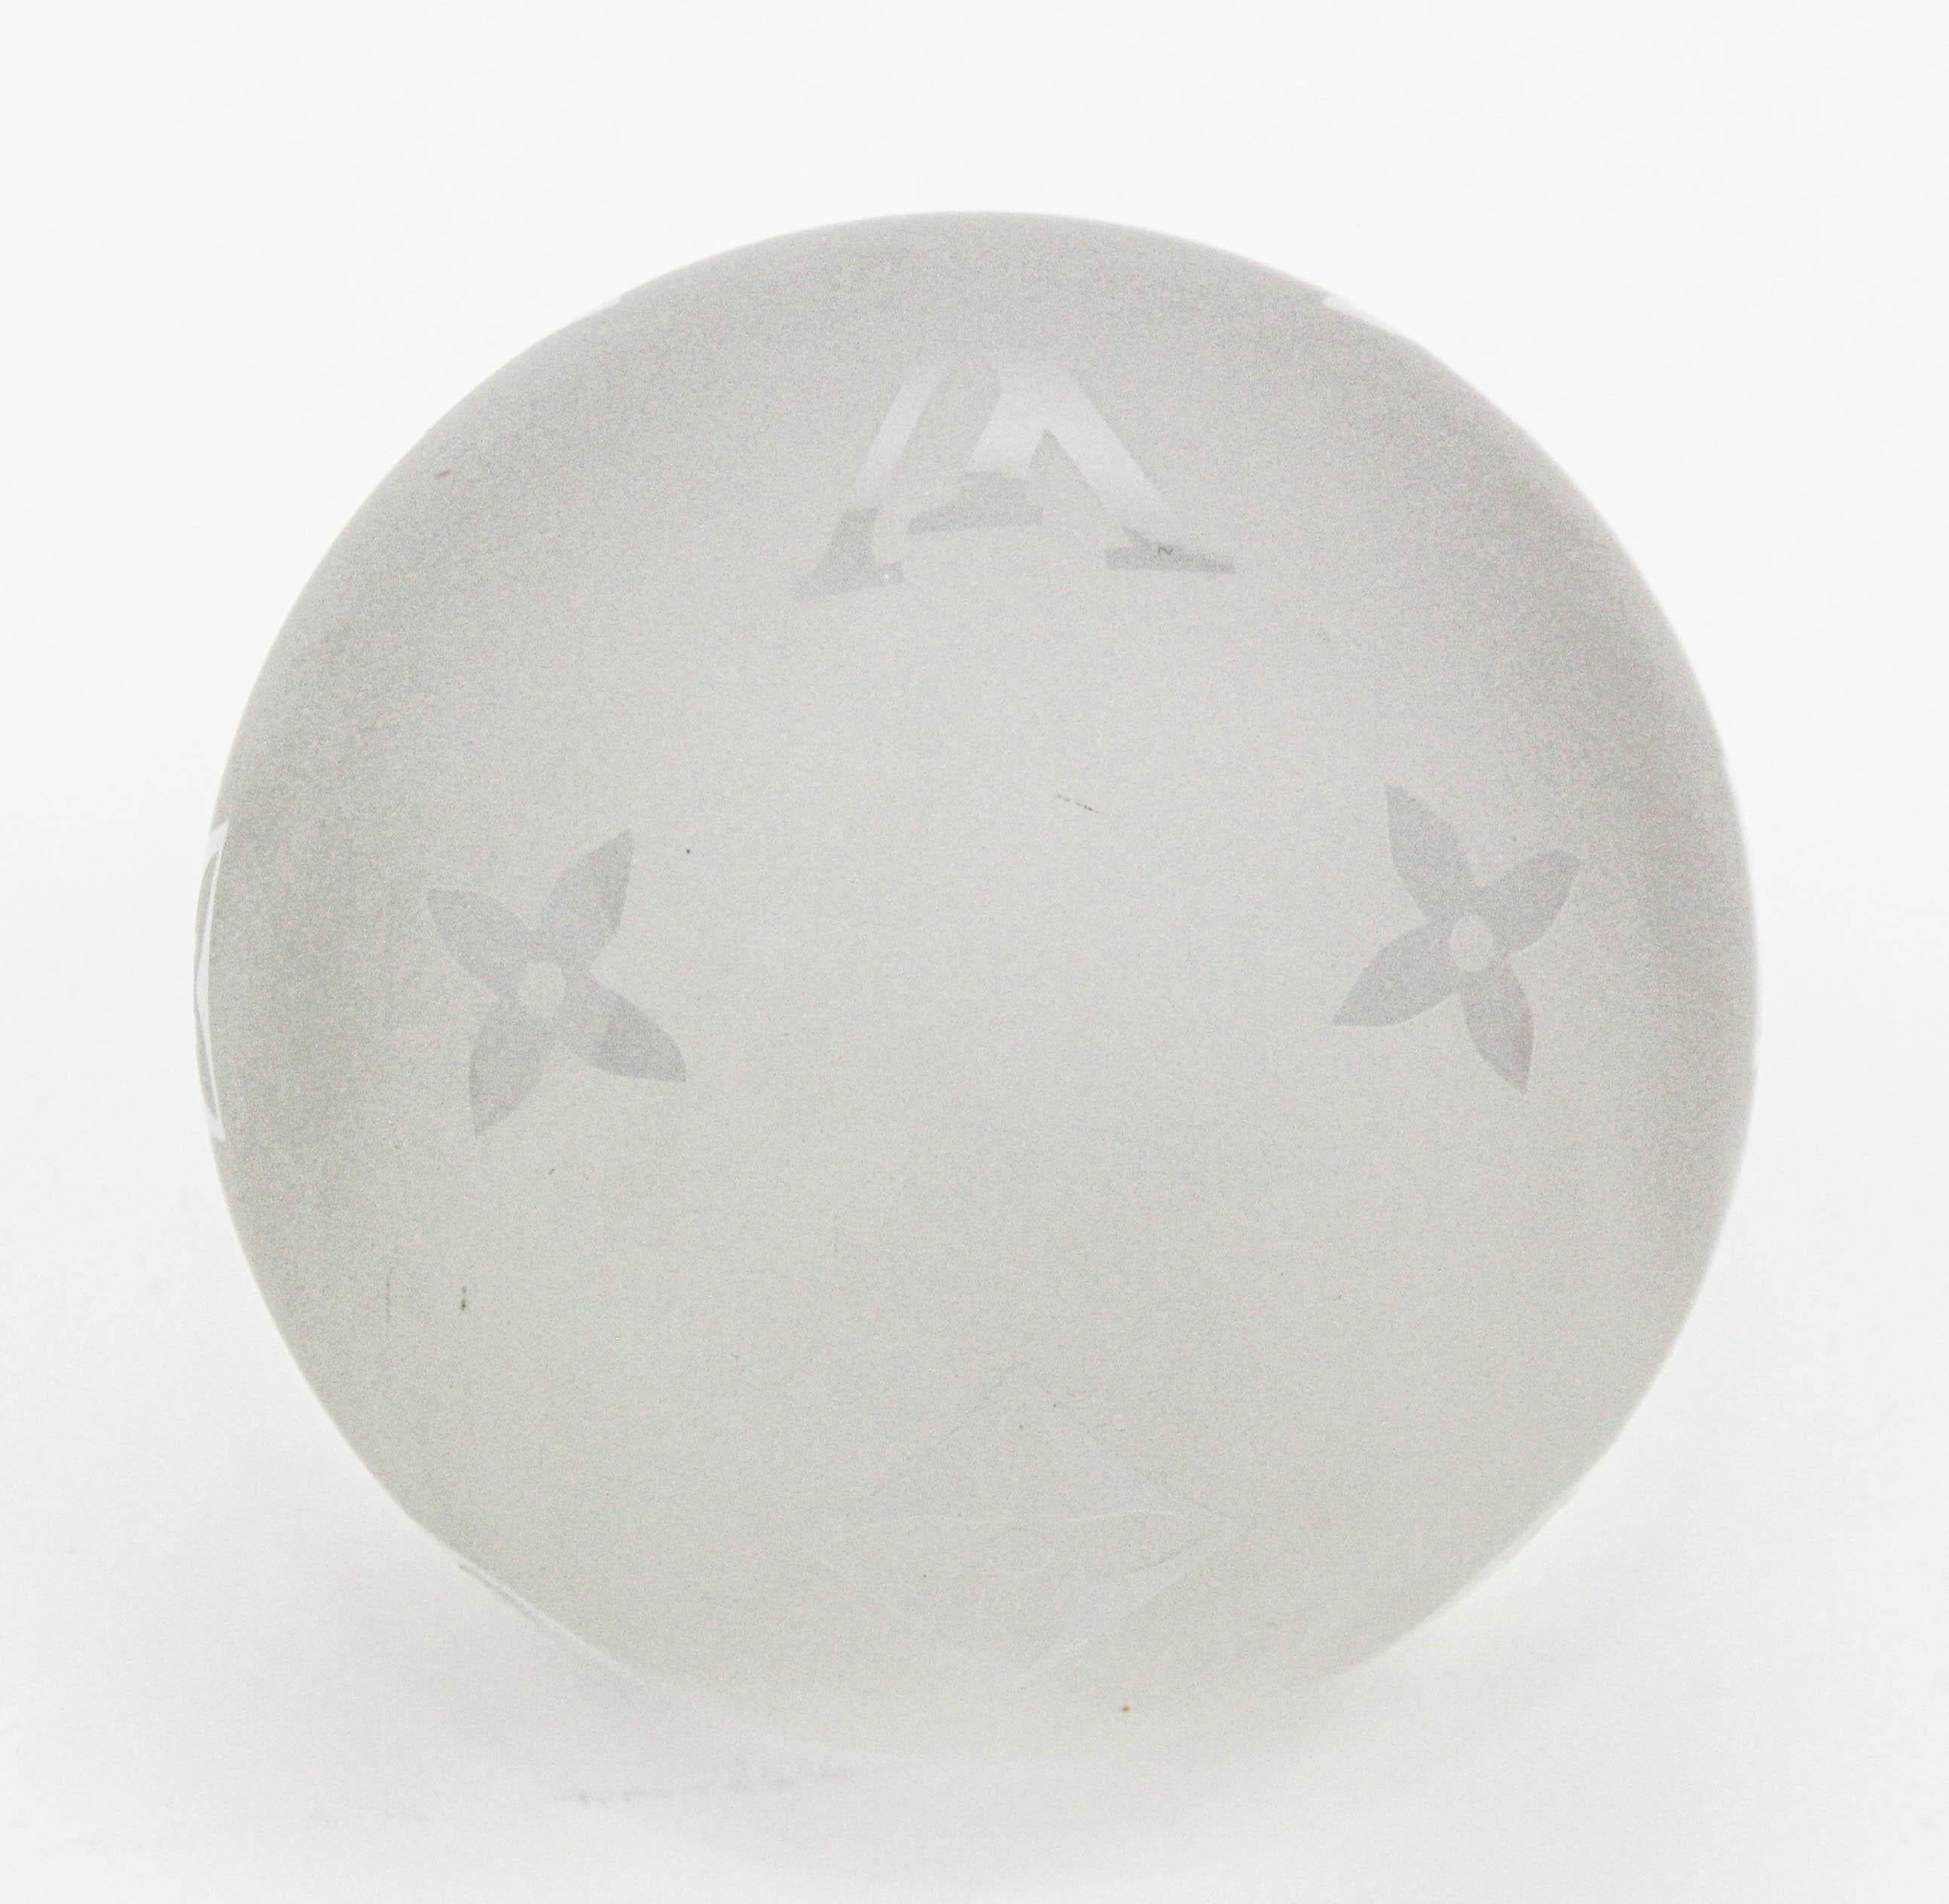 Women's or Men's LOUIS VUITTON Paperweight Monogram Clear Crystal Paper Weight